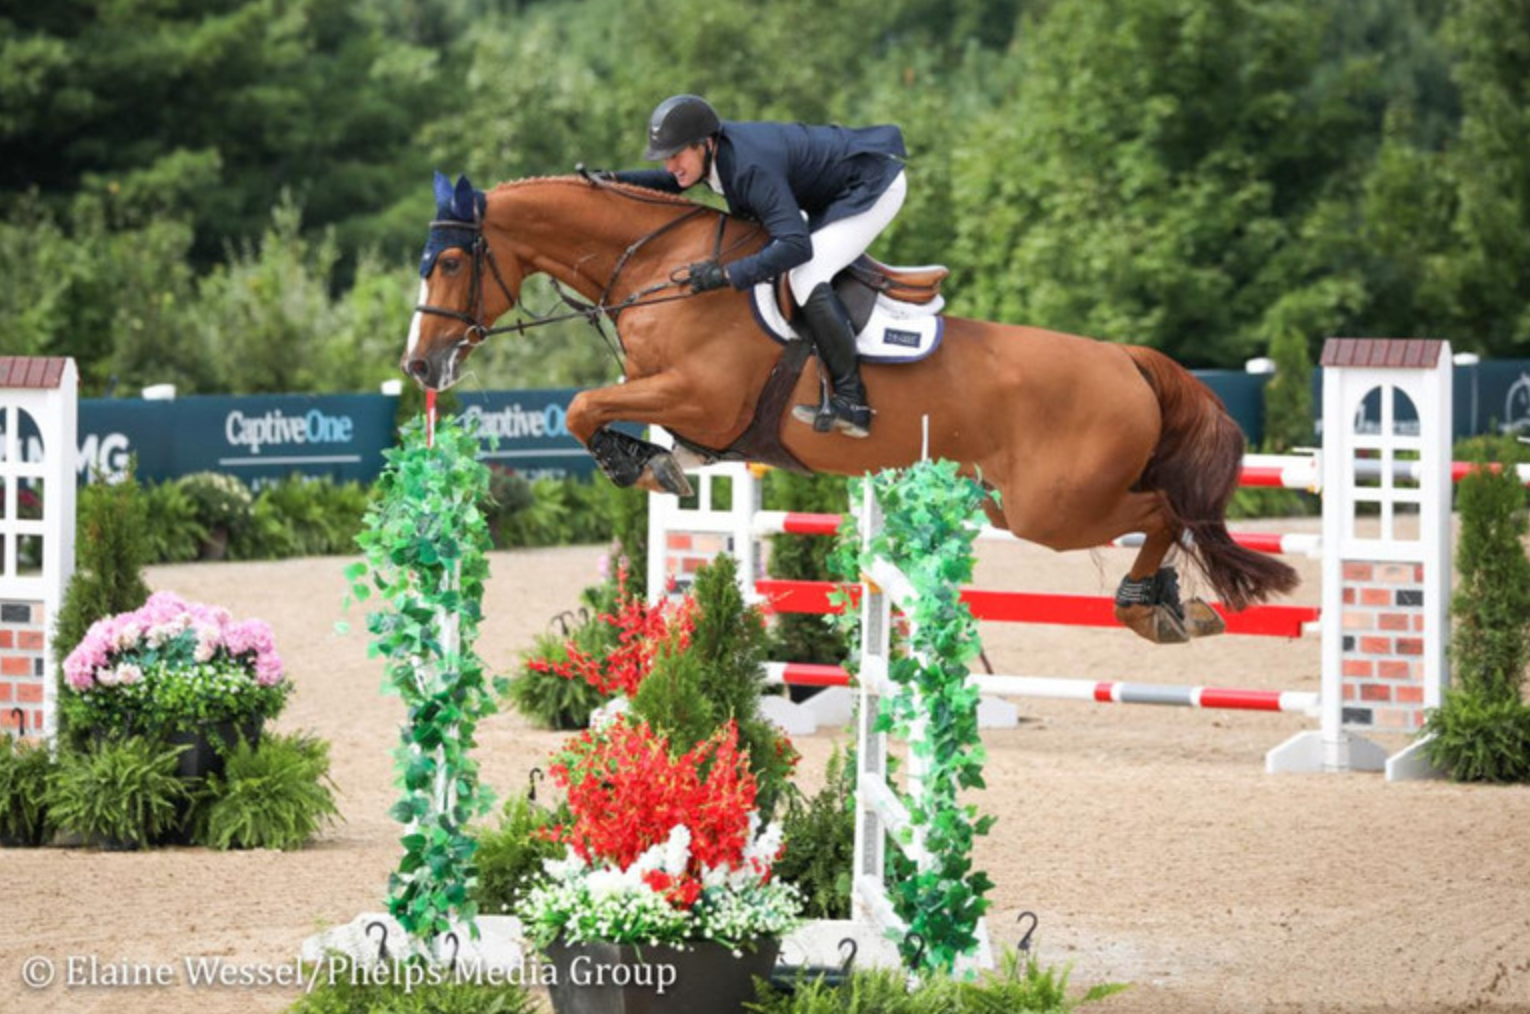 McLain Ward and Contagious claim $36,600 MMG Welcome Stake CSI3* in Traverse City debut